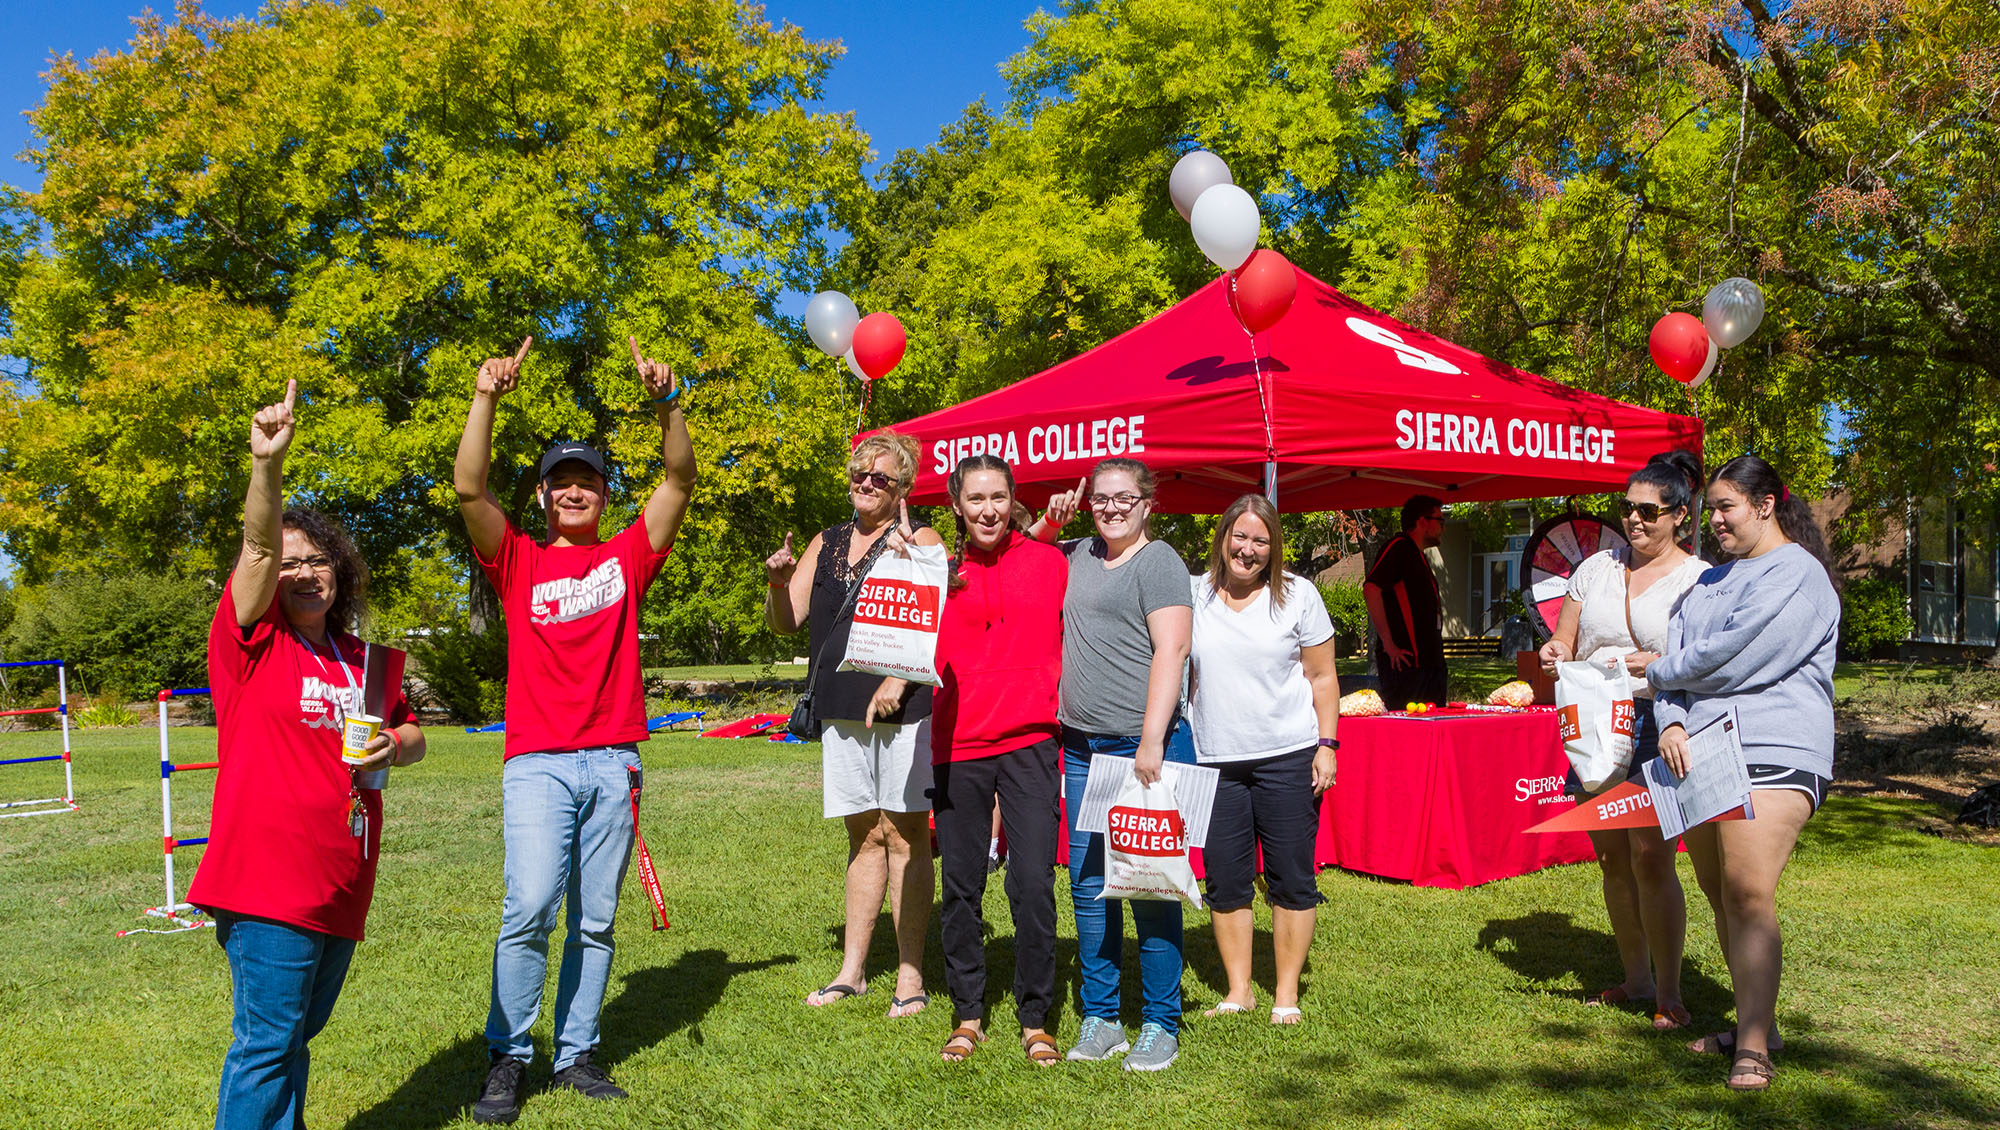 Red welcome tent with Sierra College staff cheering on prospective students and their families